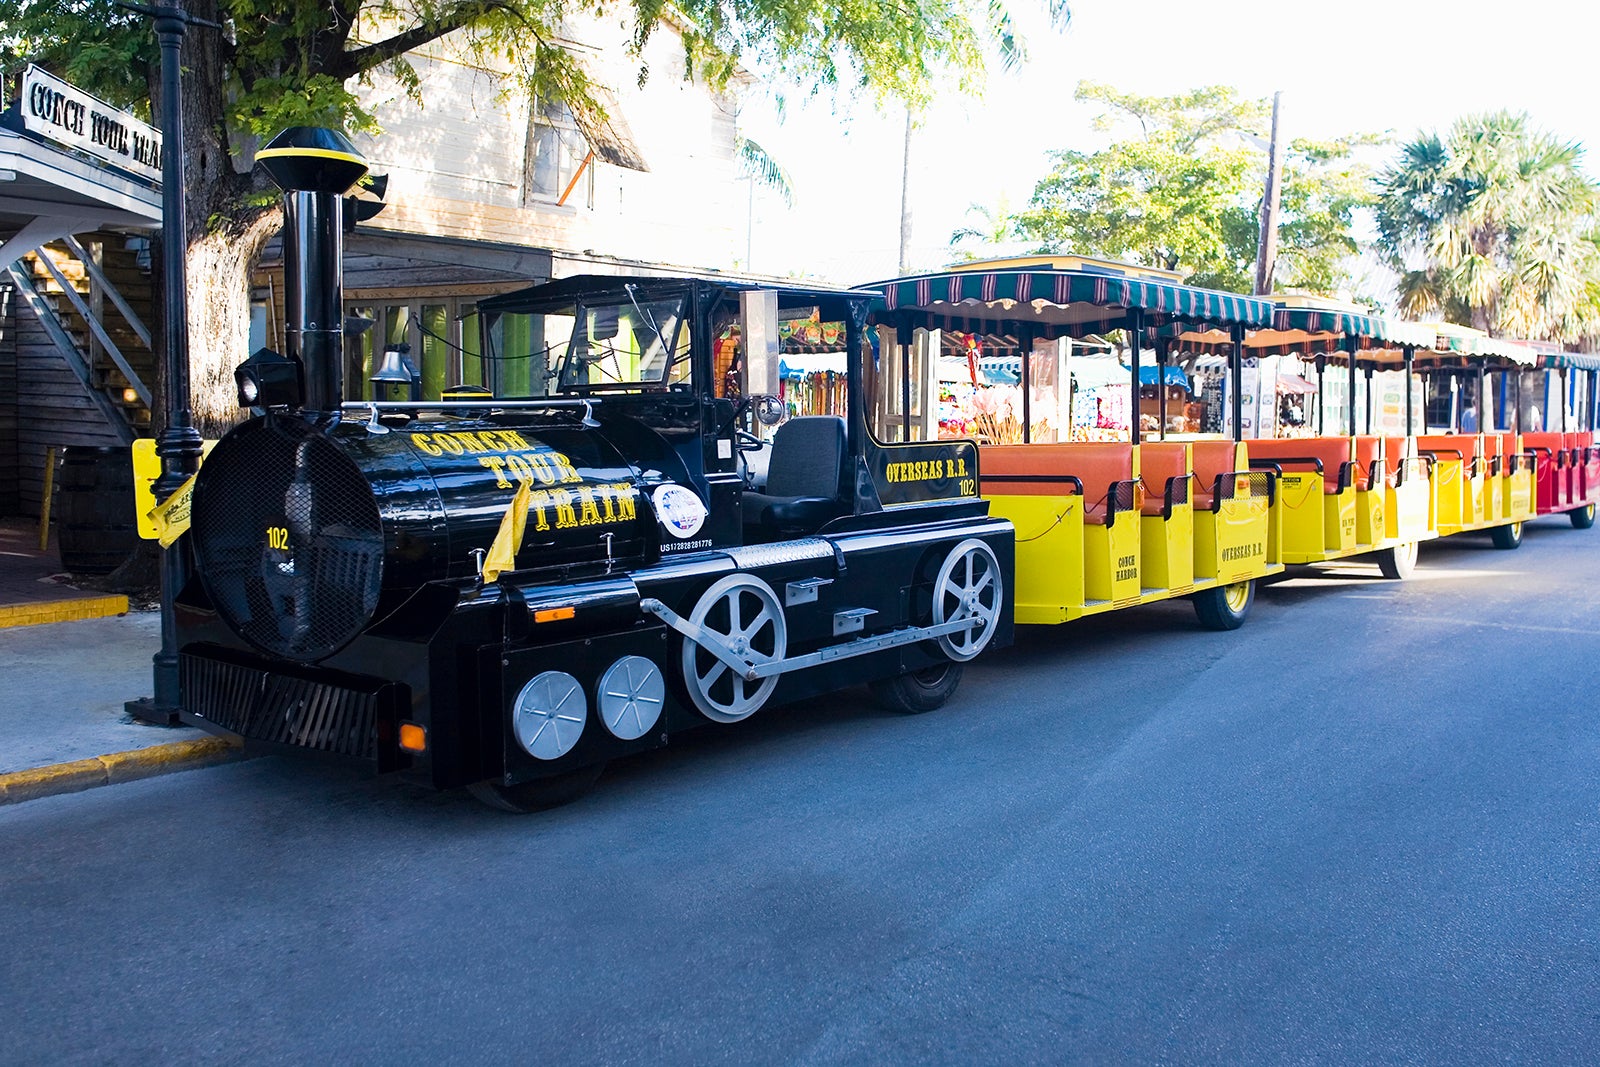 Tourist train on the road in Key West, Florida